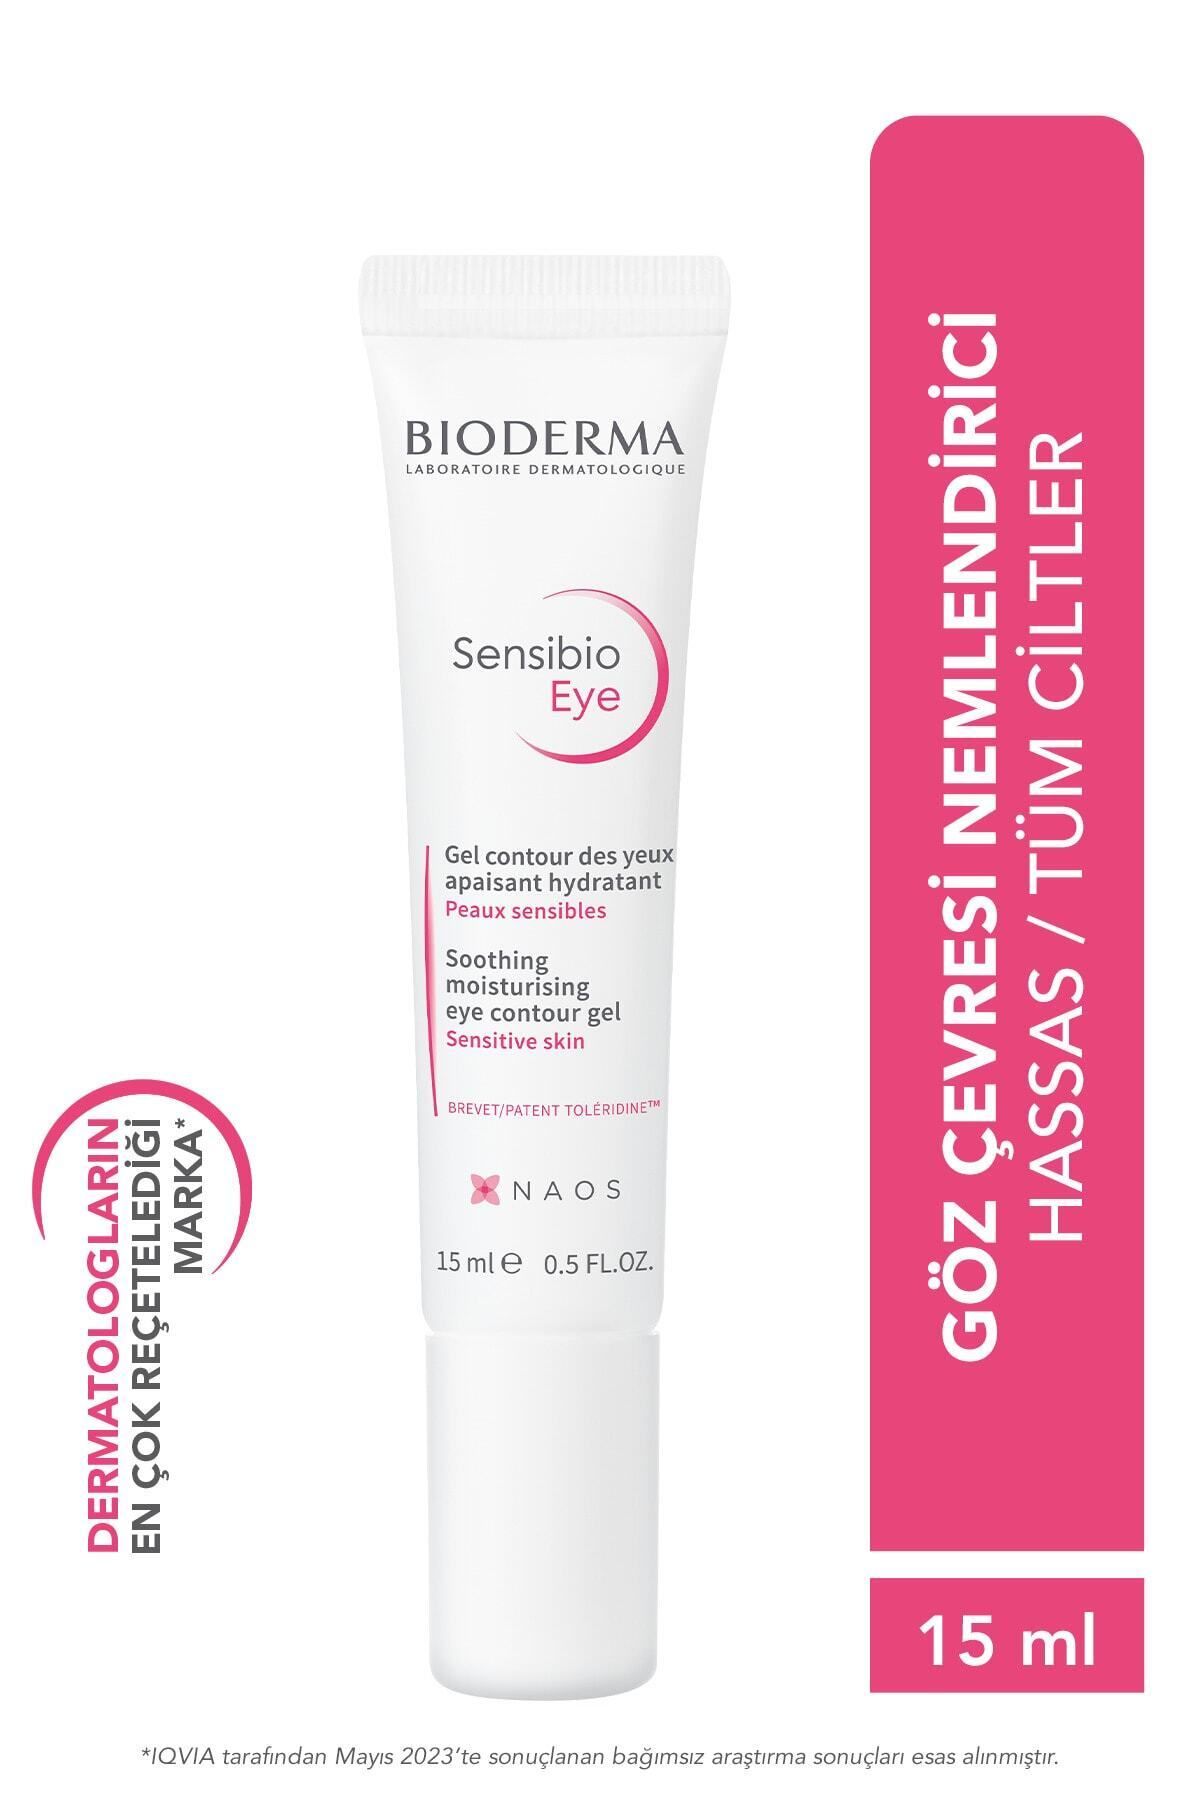 Bioderma ANTİ-FİNE LİNE CARE CREAM WİTH HYALURONİC ACİD FOR THE SENSİTİVE EYE AREA 15 ML PSSN1569